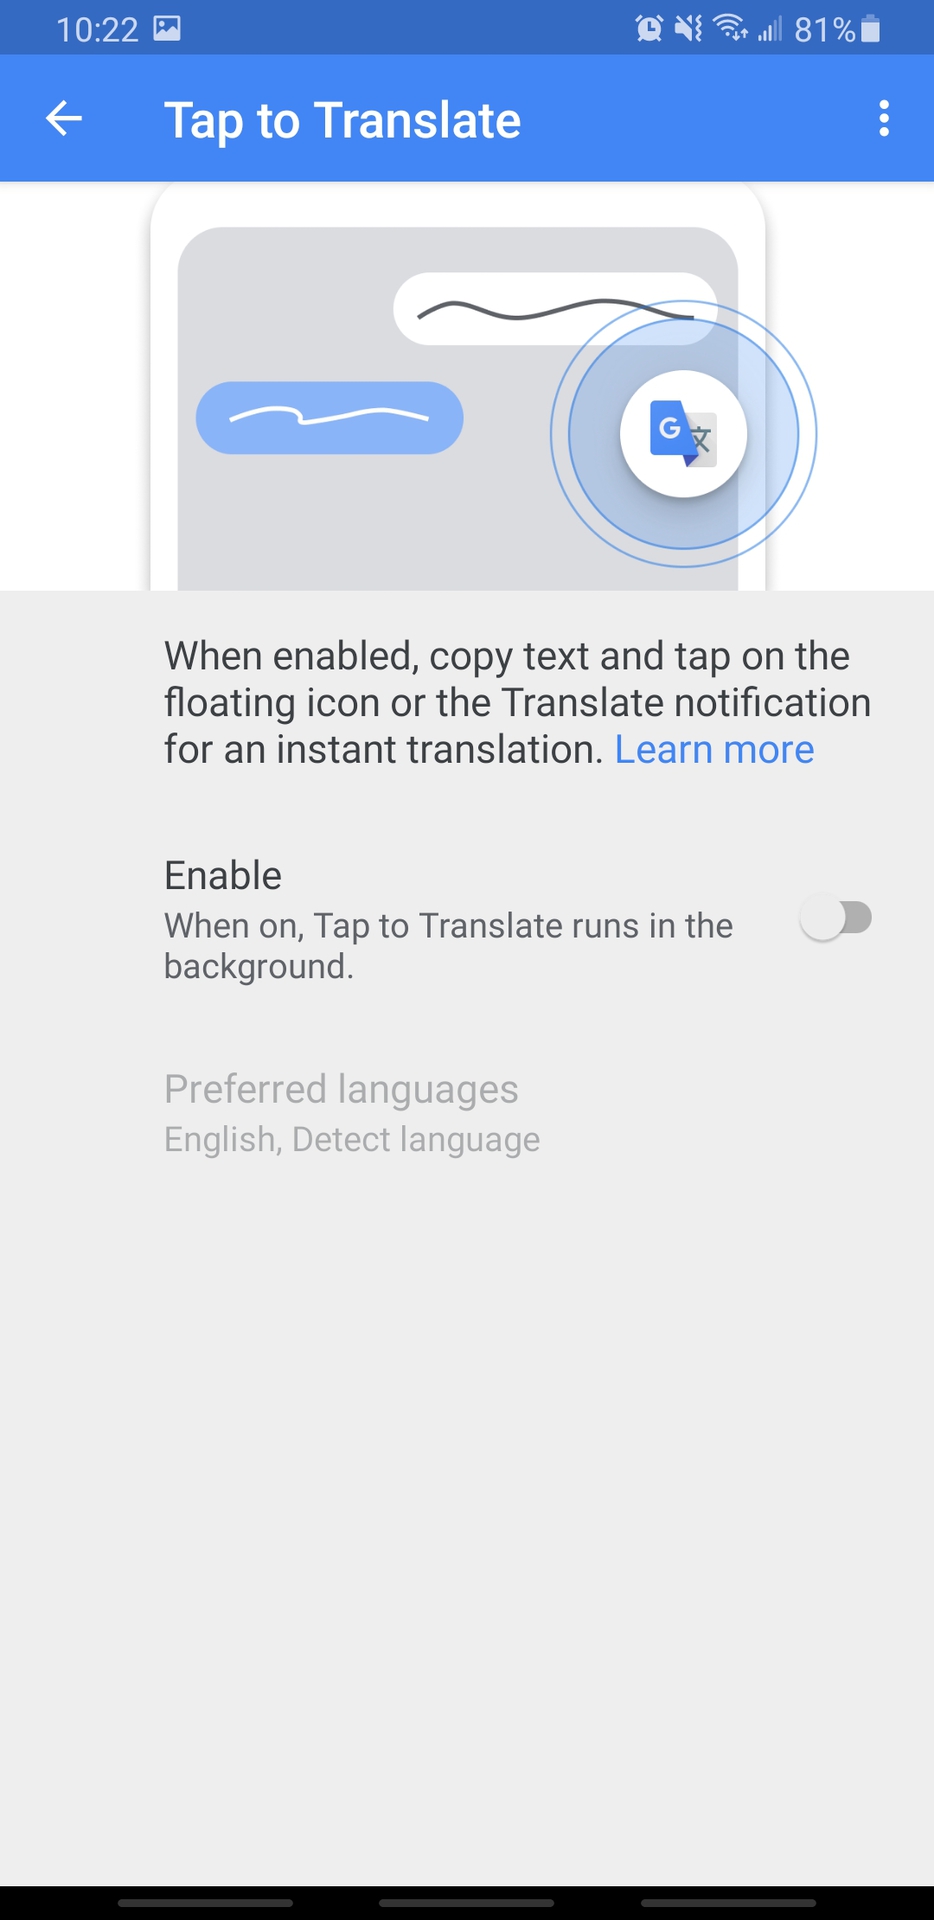 tap to translate feature